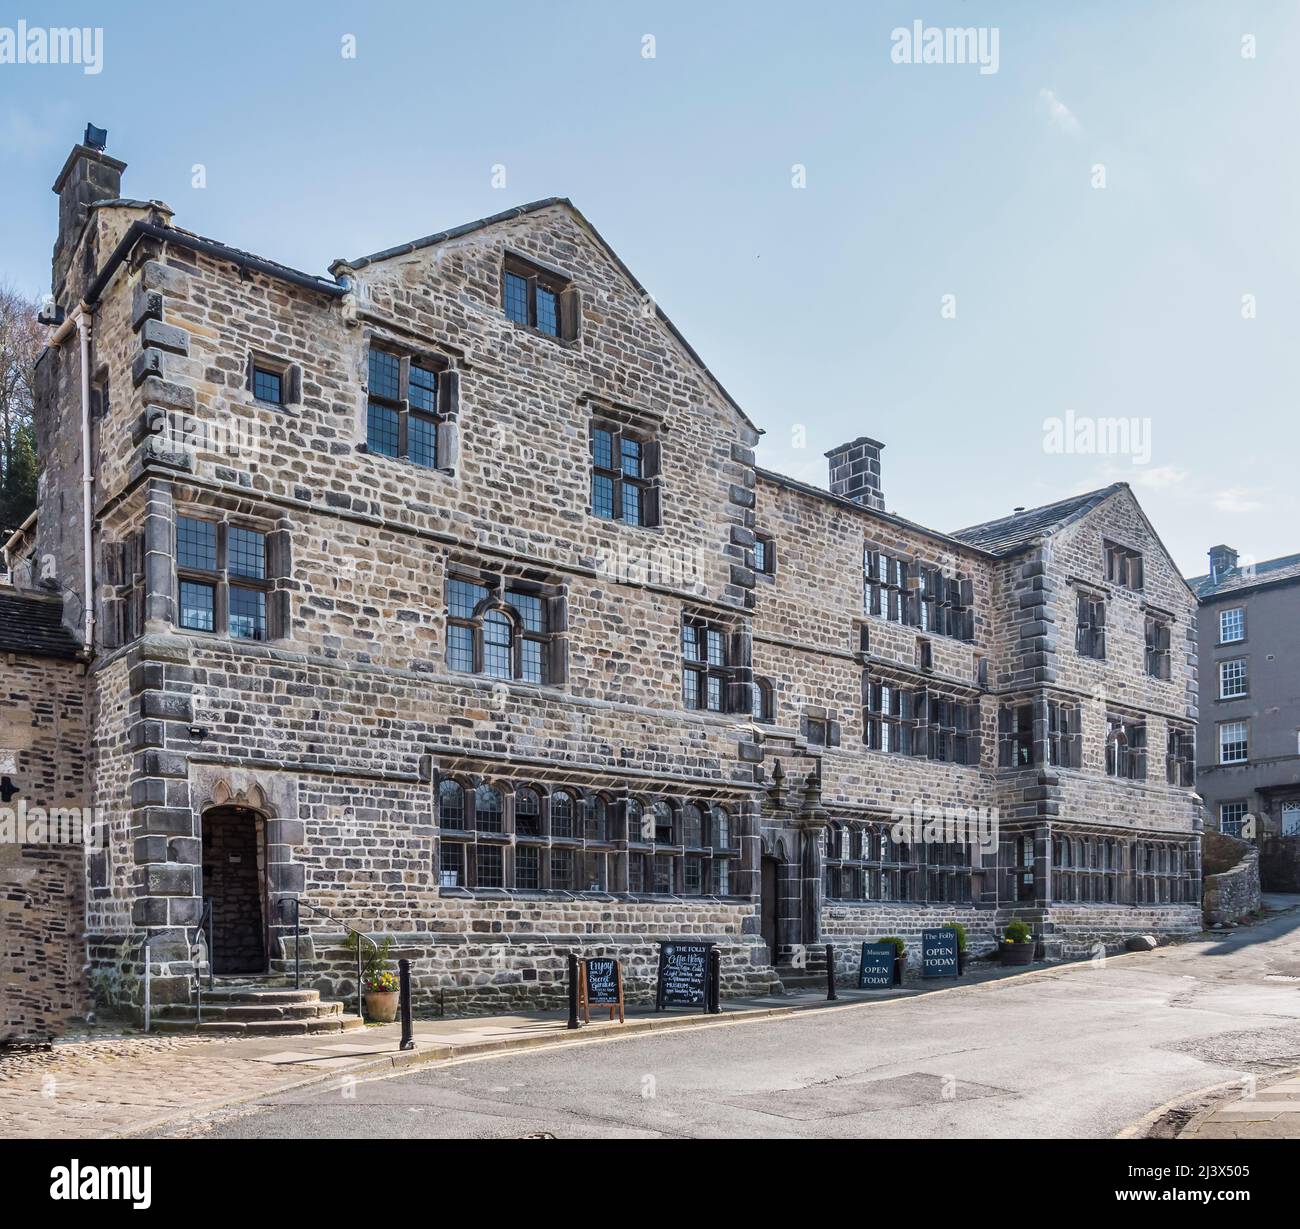 The image is of the 16th century building known as the Folly, now the Museum of North Craven in the Yorkshire Dales Market town of Settle Stock Photo